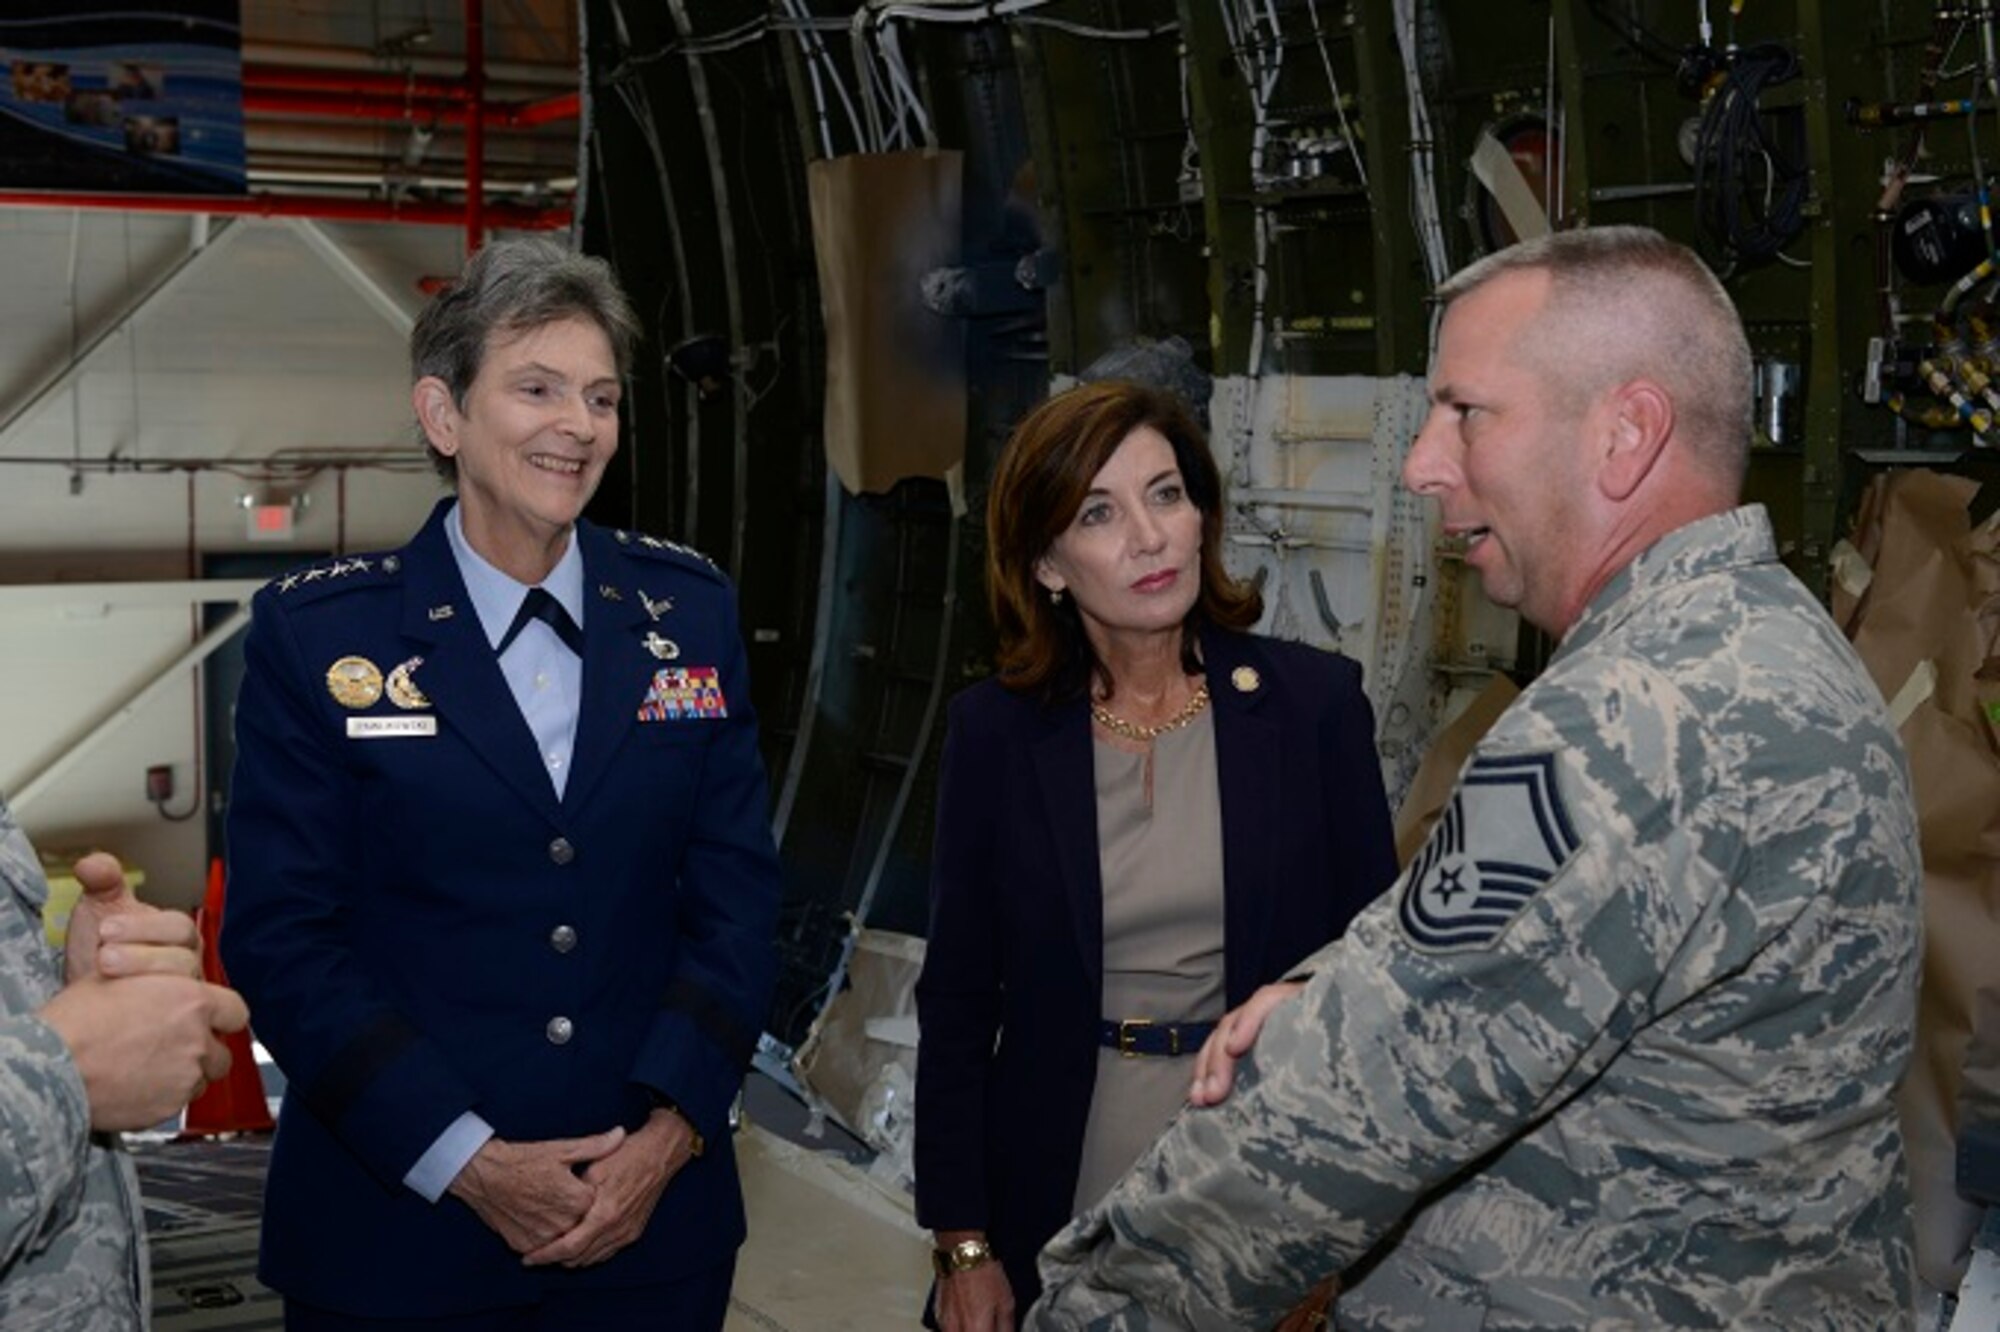 Senior Master Sgt. Dennis Pitcher briefs Gen. Ellen M. Pawlikowski, Air Force Materiel Command commander, and New York Lieutenant Governor Kathy Hochul on the C-5M interior refurbishment mission Oct. 5 at Stewart Air National Guard Base, N.Y. The two leaders met with Airmen and observed operations at the New York Air National Guard's 105th Airlift Wing. A total of 52 C-5 aircraft are being converted to the C-5M Super Galaxy configuration which includes avionics upgrades, new engines and other performance and reliability enhancements. The last step is a complete 40-day refurbishment of the aircraft interior performed by Total Force Airmen at Stewart. Pitcher is superintendent of C-5M refurb operations with the 105th AW. (U.S. Air Force photo/Staff Sgt. Julio A. Olivencia Jr.)